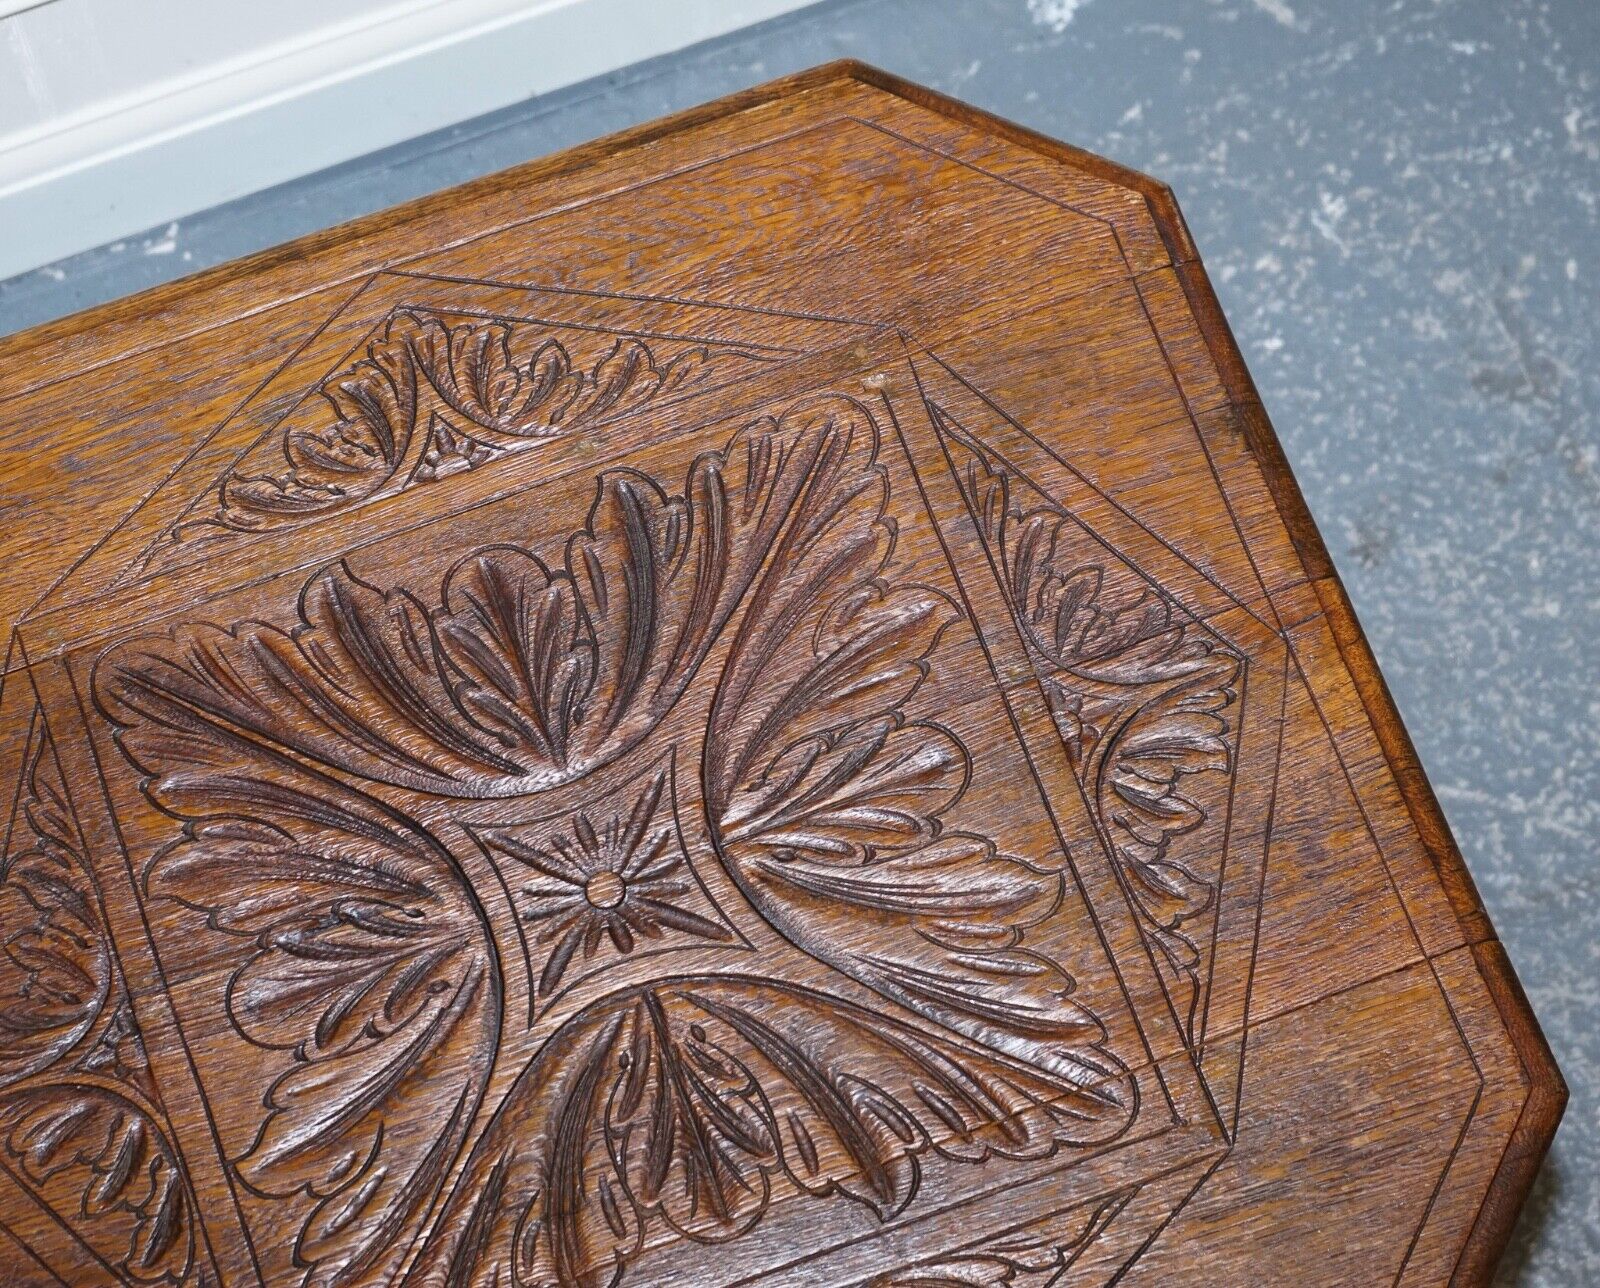 LOVELY CARVED GOTHIC OAK SIDE TABLE